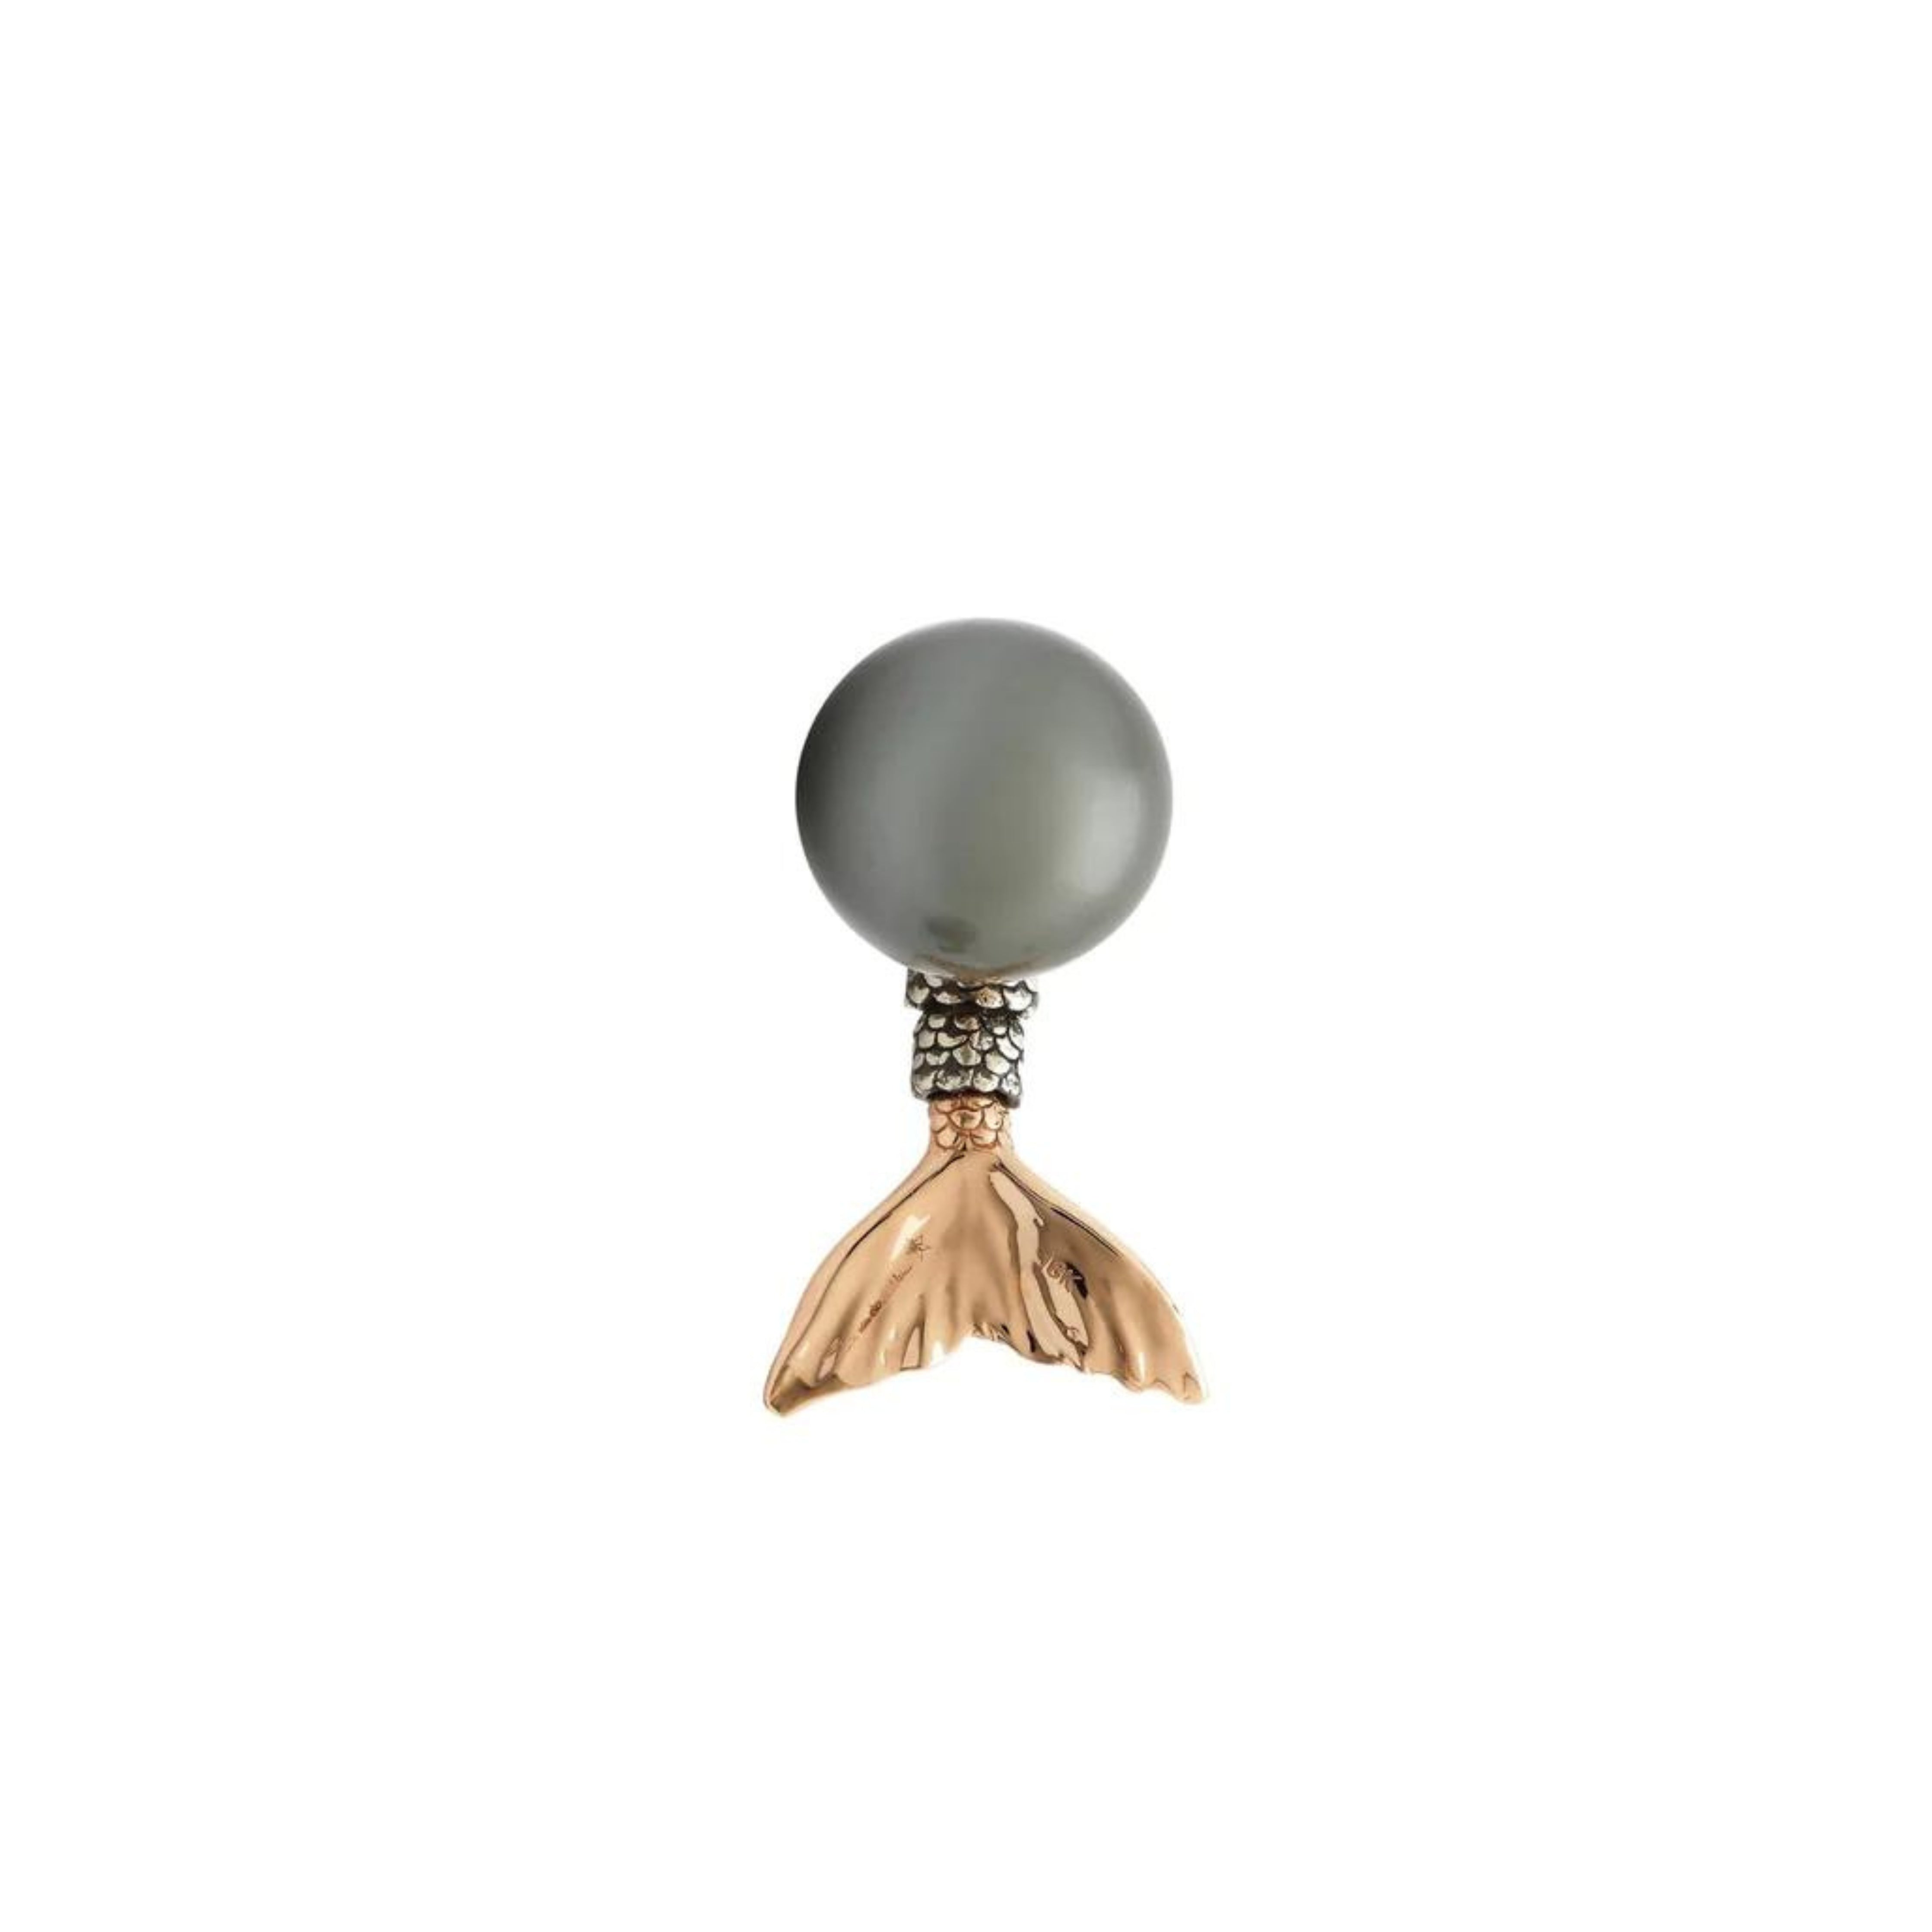 Bibi van der Velden Mermaid Pearl Earring. Made in 18K rose gold and sterling silver with a deep blue pearl and brown diamonds. Featuring a moving mermaid&#39;s tail with moving scales and gold fin. Shown from the front.